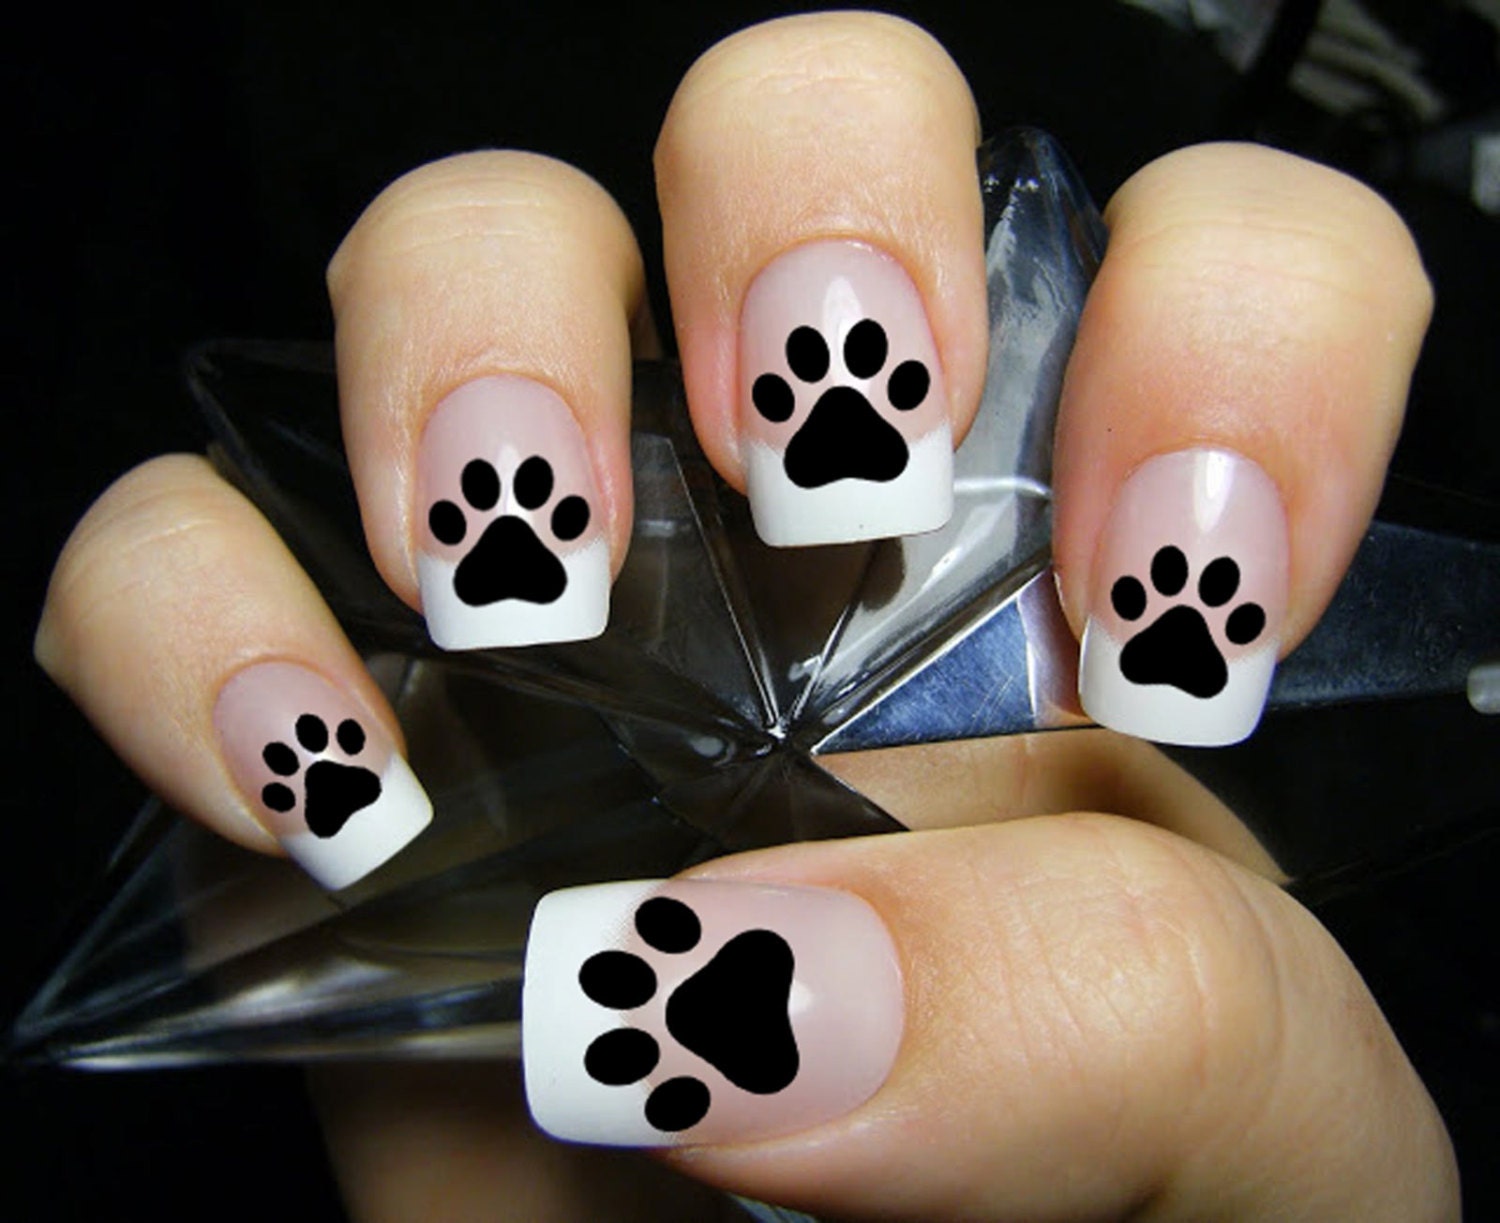 10. Creative Ways to Incorporate Paw Prints into Your Nail Art - wide 5